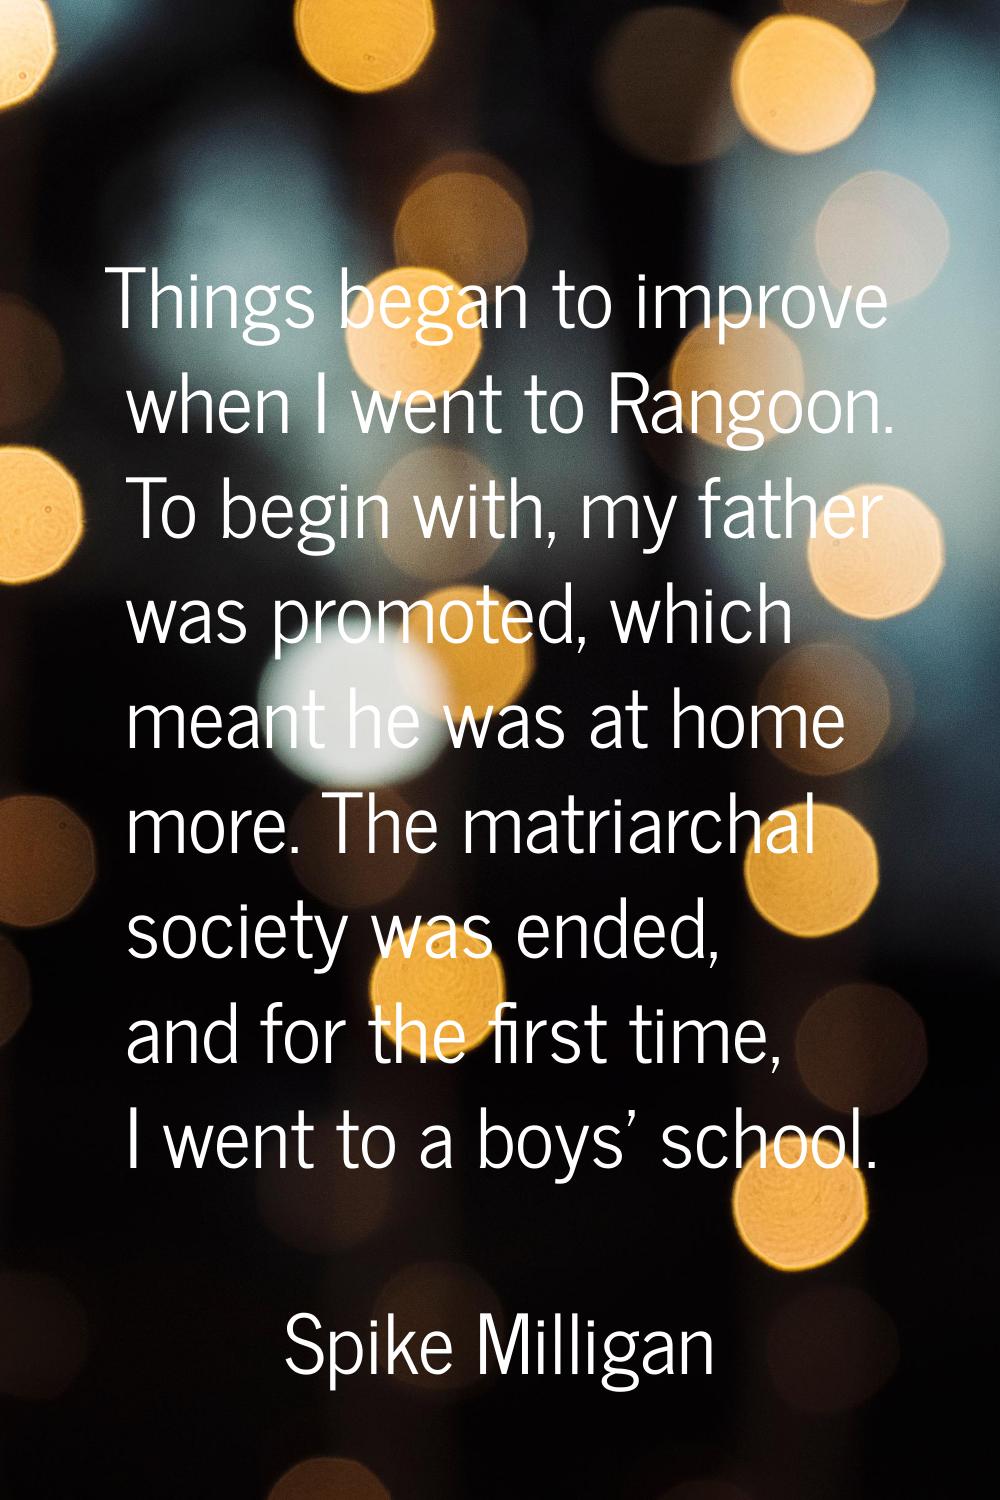 Things began to improve when I went to Rangoon. To begin with, my father was promoted, which meant 